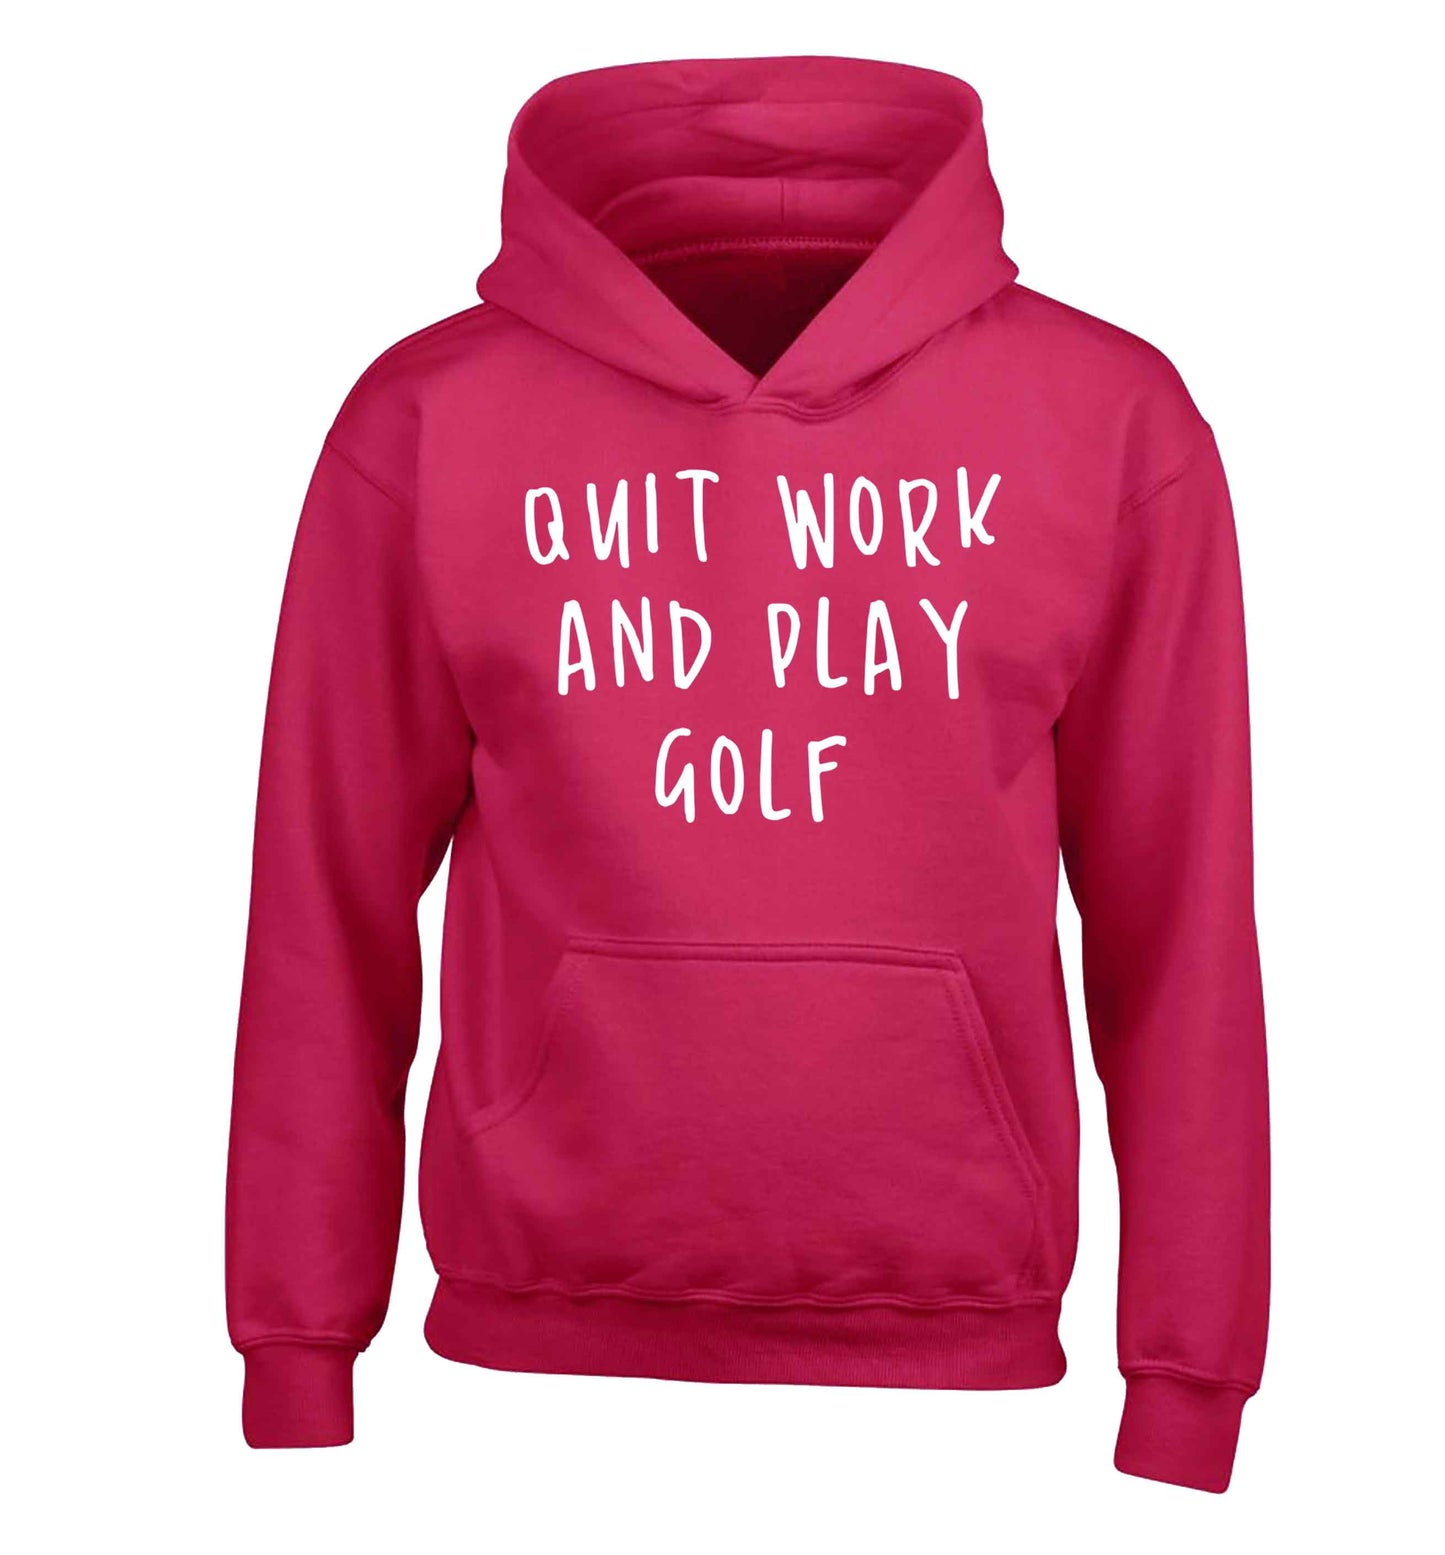 Quit work and play golf children's pink hoodie 12-13 Years